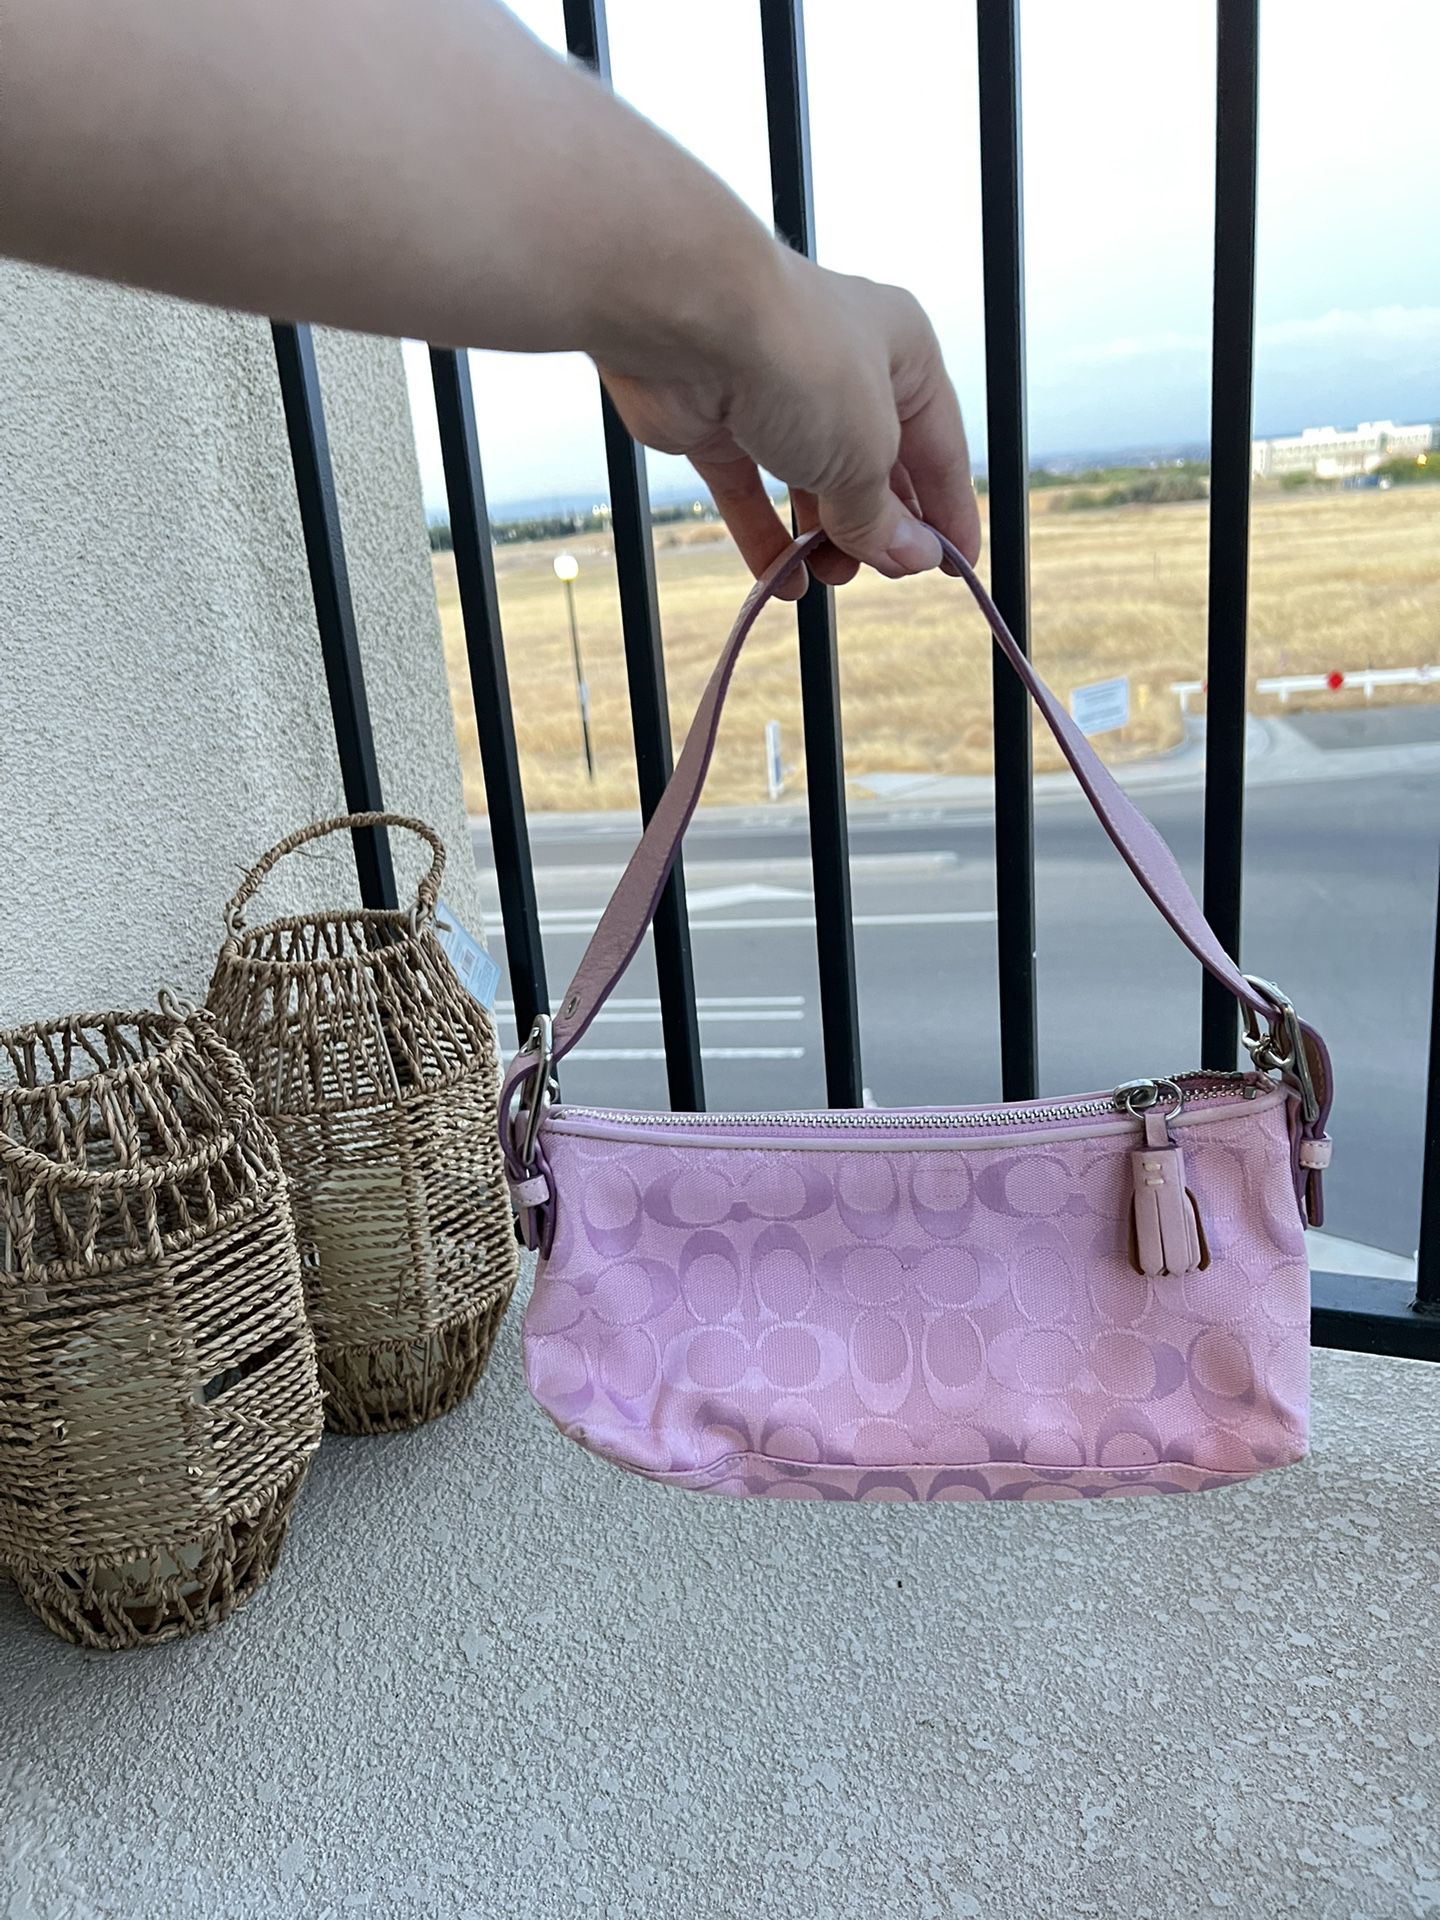 Vintage Hobo Pink Coach Bag for Sale in Sunnyvale, CA - OfferUp